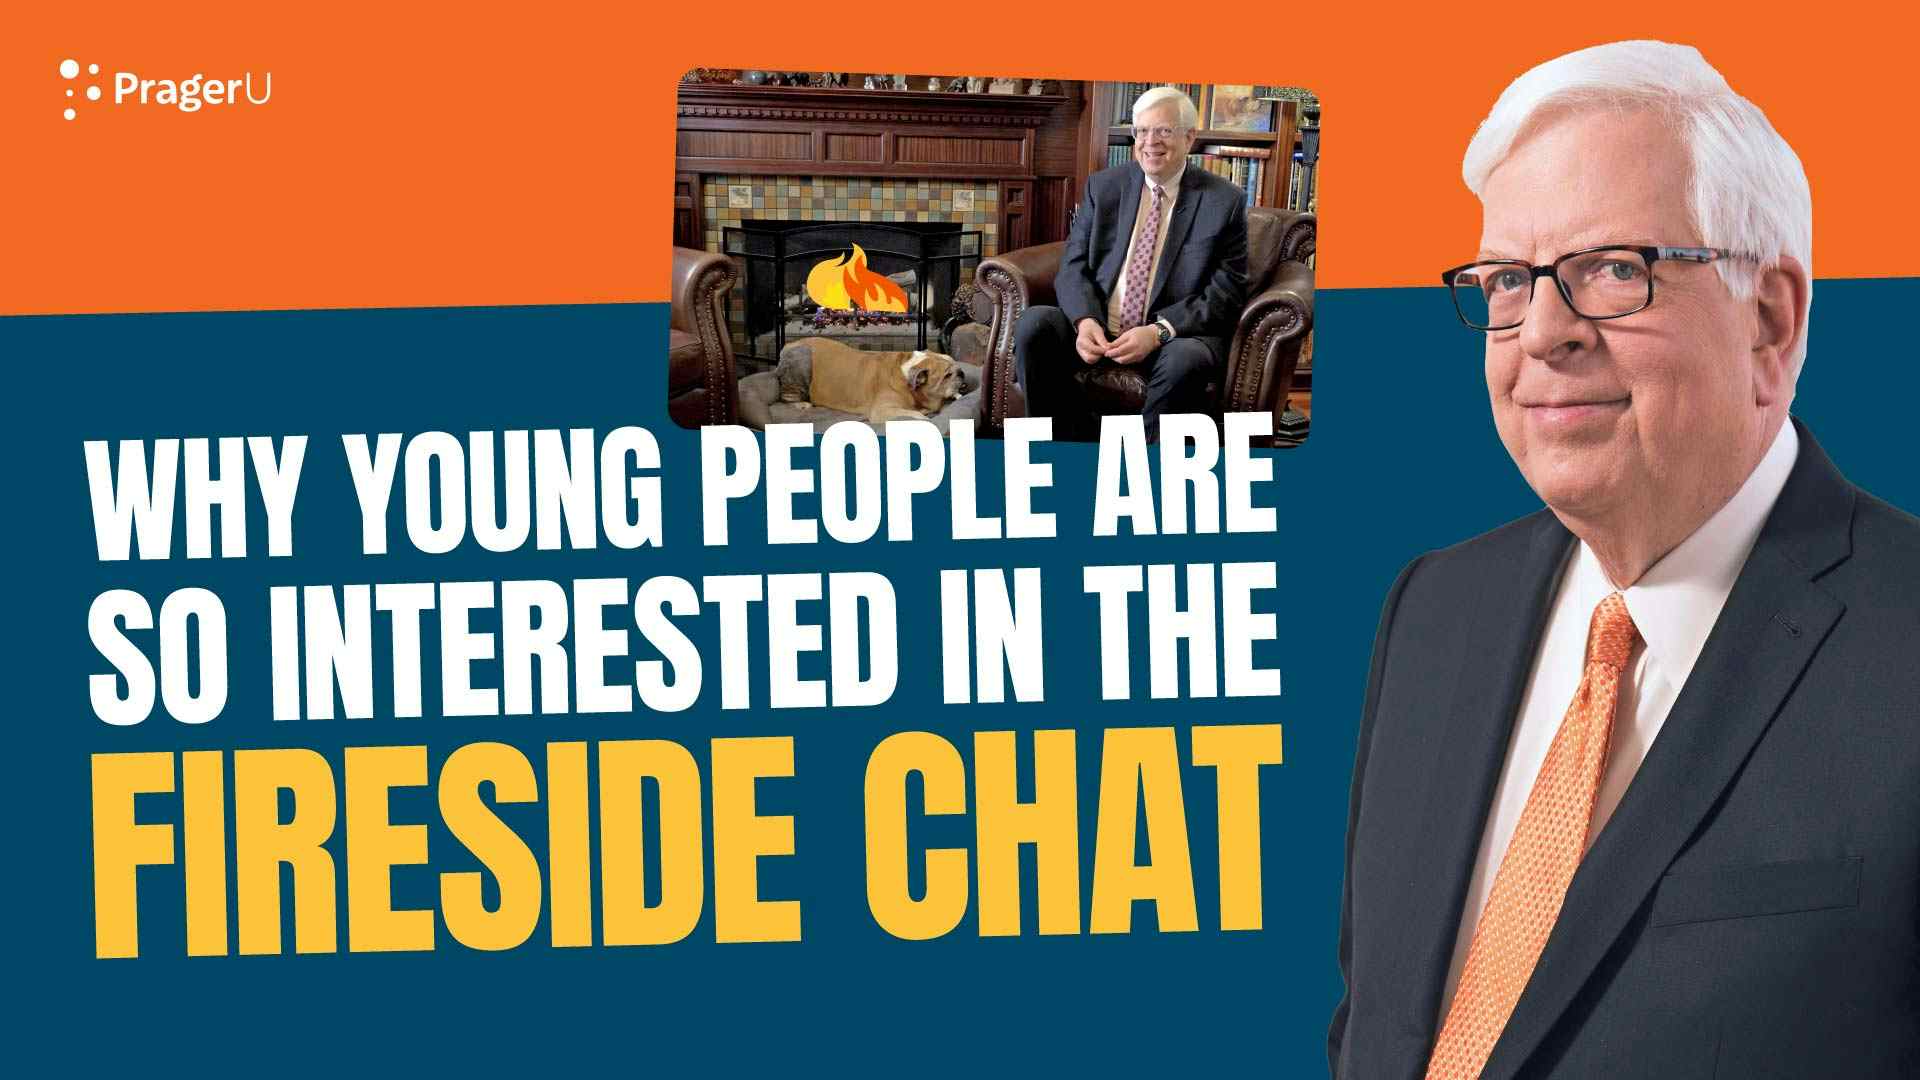 Why Young People Are So Interested in the Fireside Chat